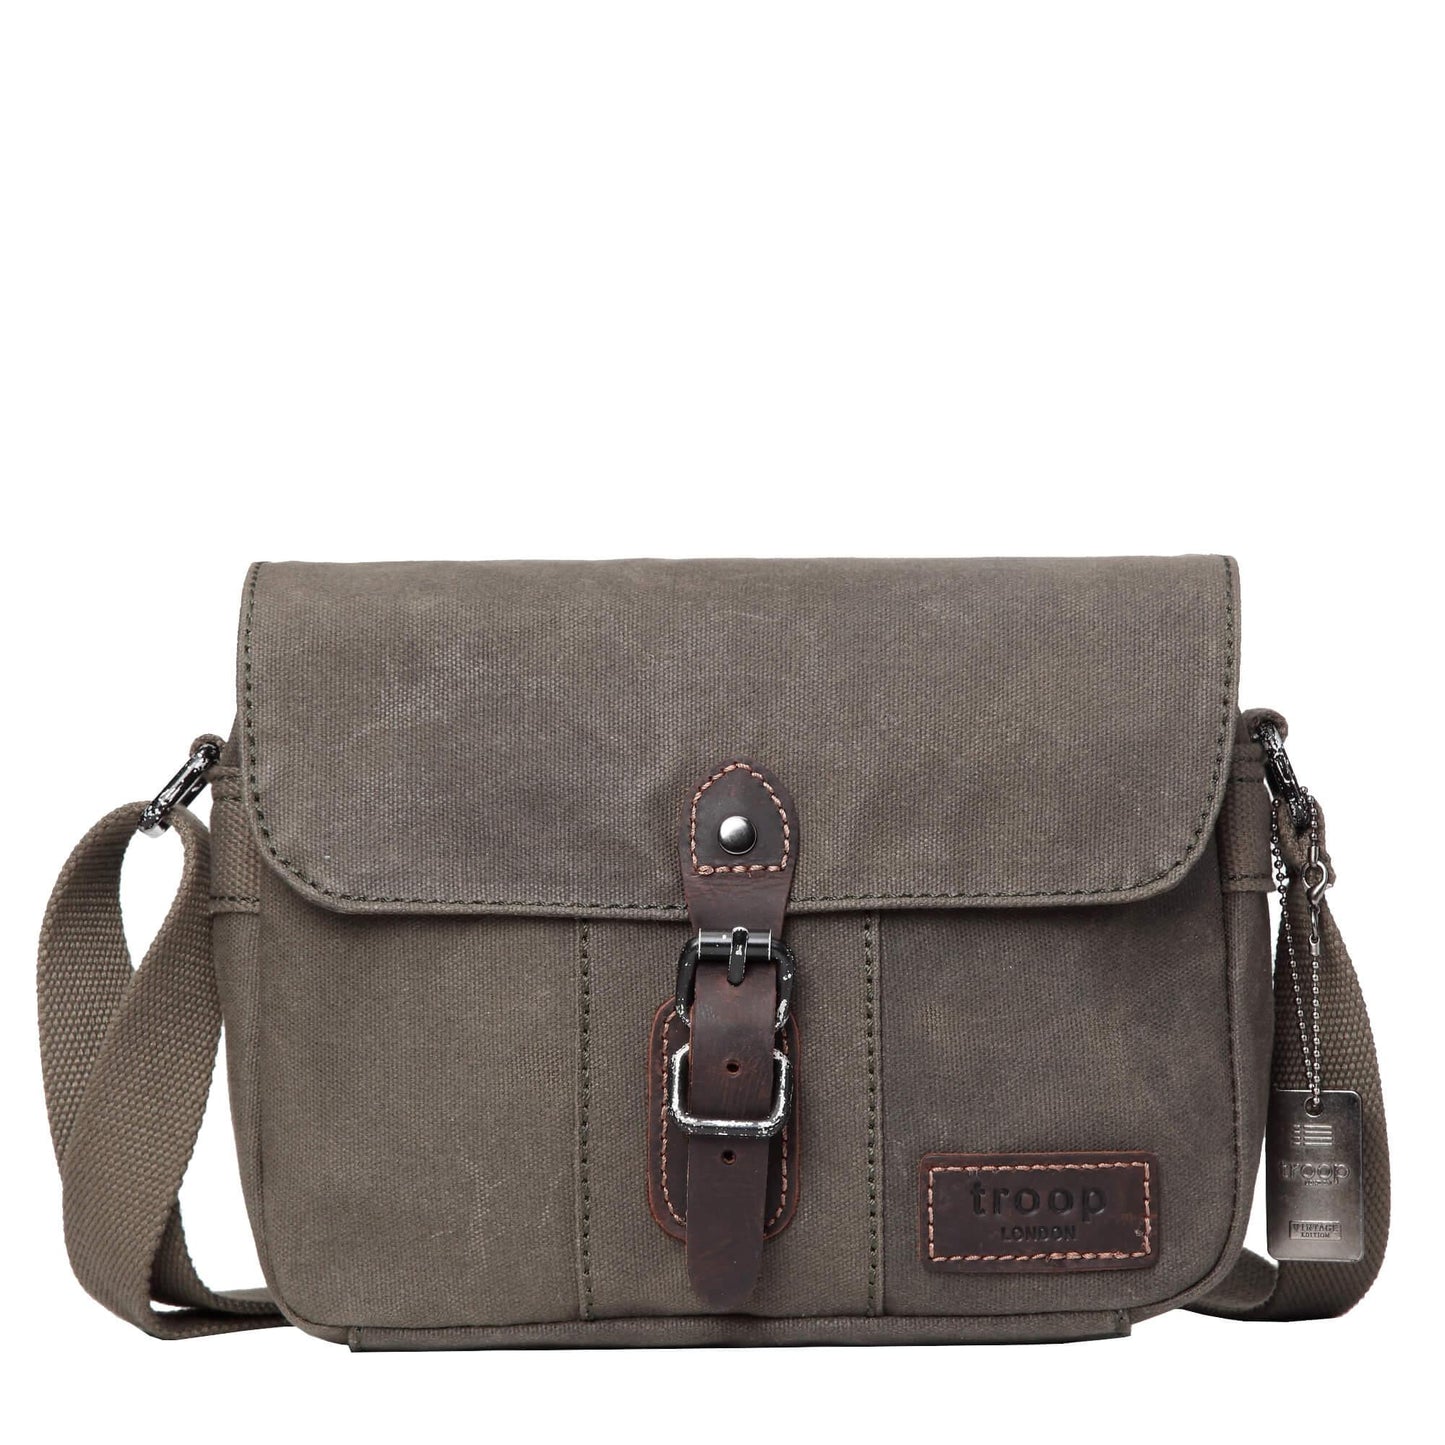 TRP0440 Troop London Heritage Canvas Leather Across body Bag, Small Travel Bag - GALAXY PORTAL